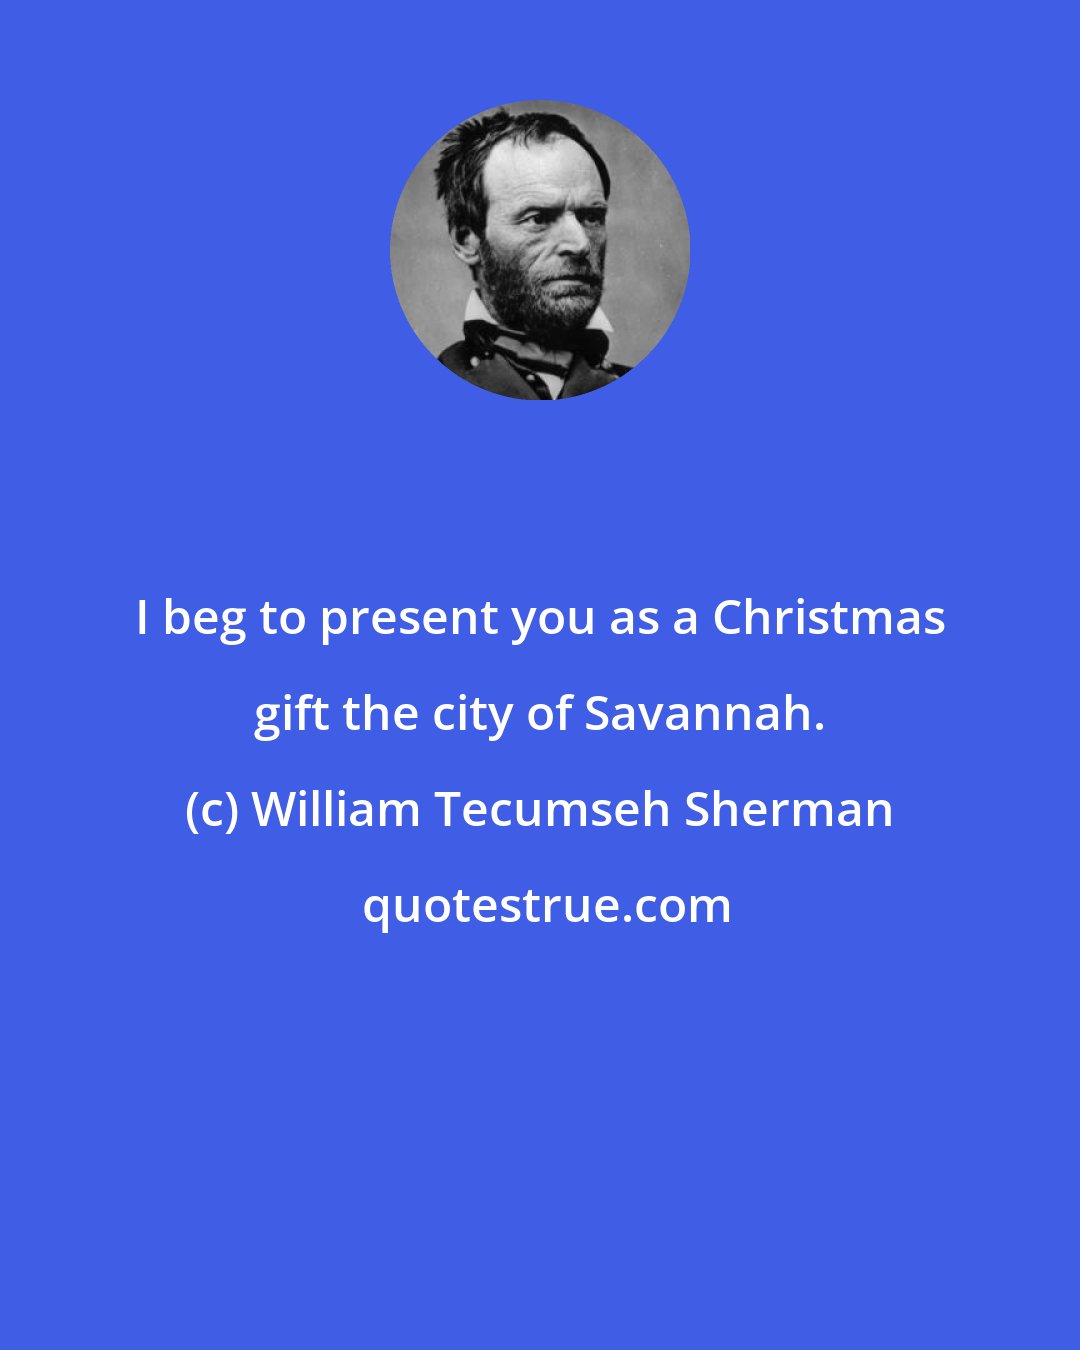 William Tecumseh Sherman: I beg to present you as a Christmas gift the city of Savannah.